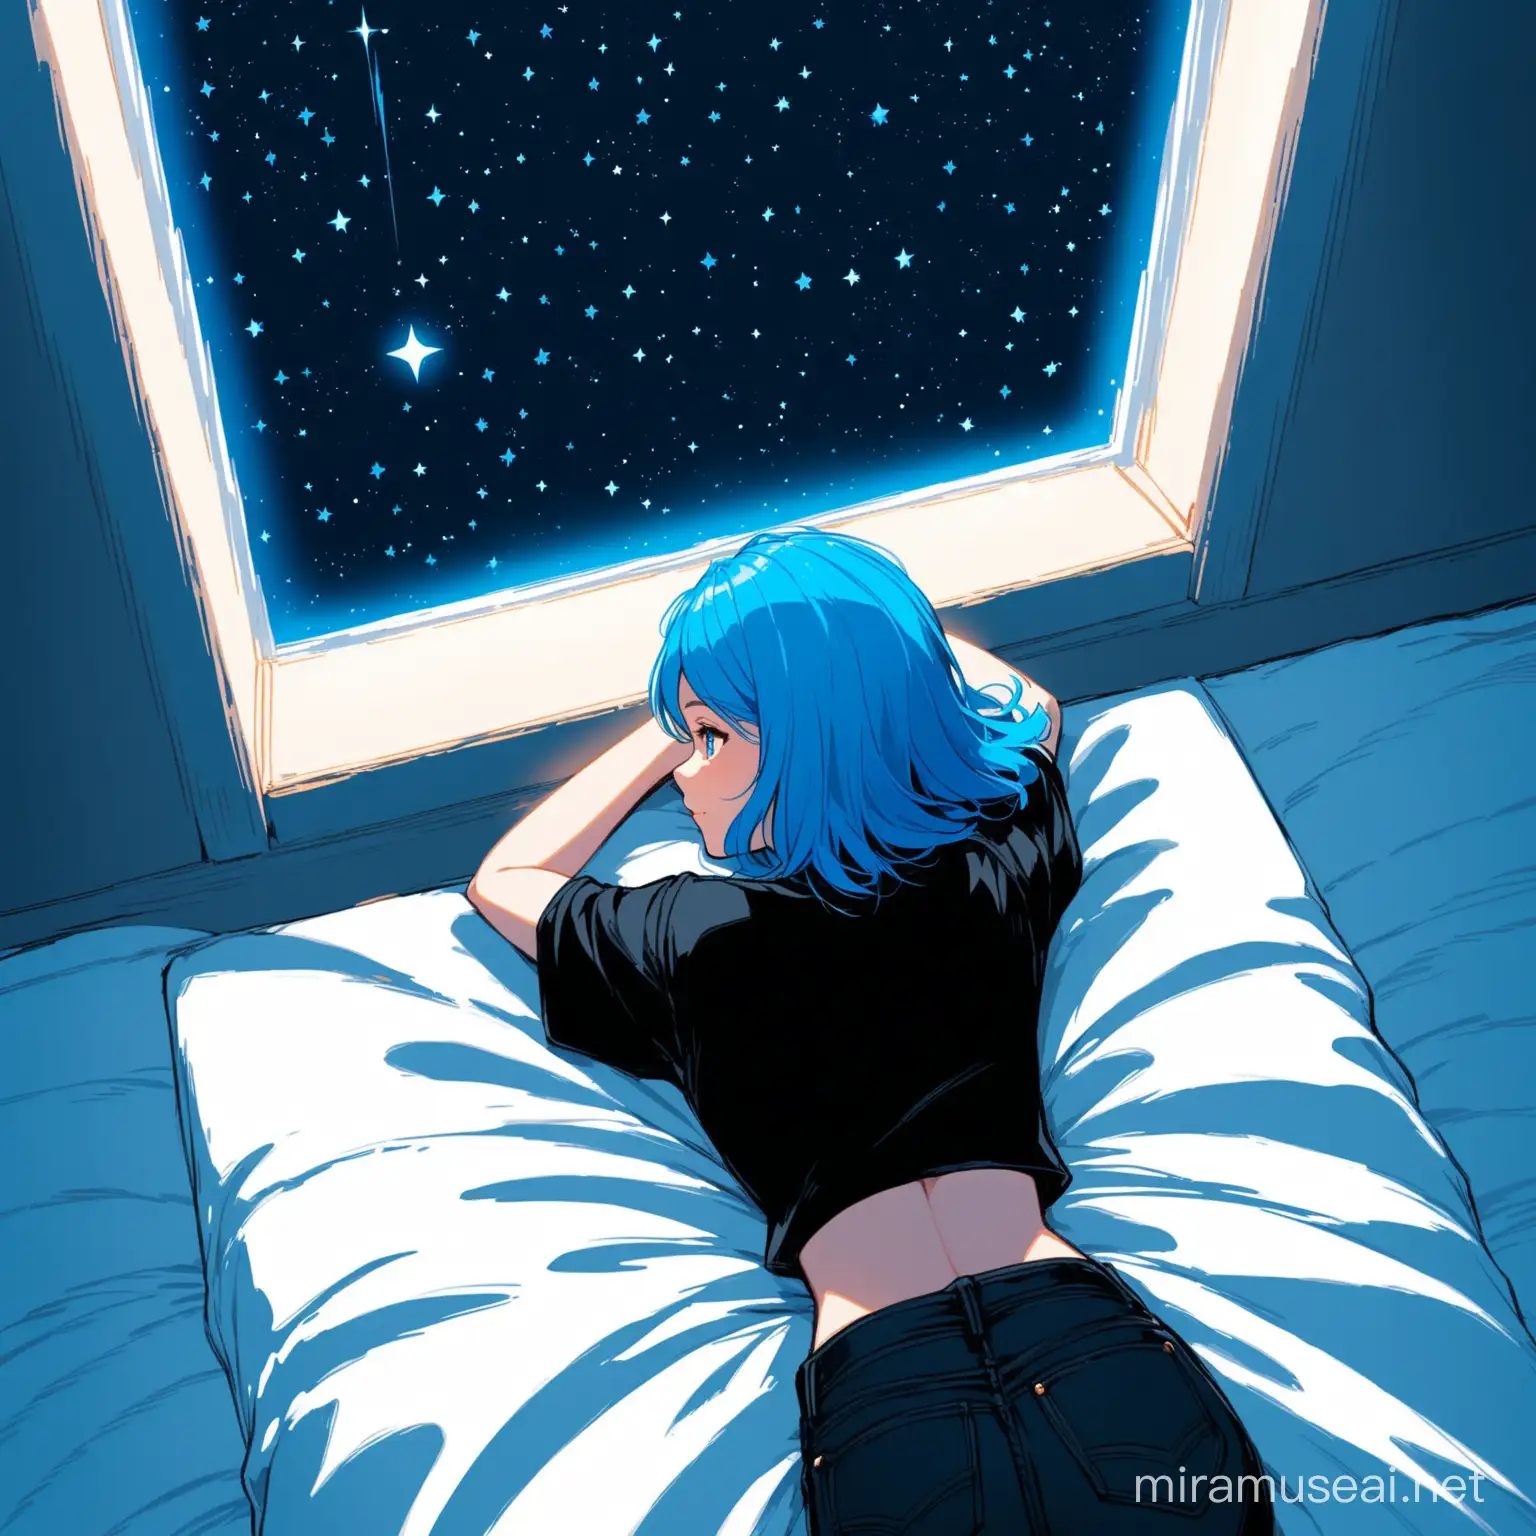 Top-down view of a cartoon-style girl with vibrant blue hair lying on bed, dressed in a black top and black jeans, gazing out of her window at the stars.